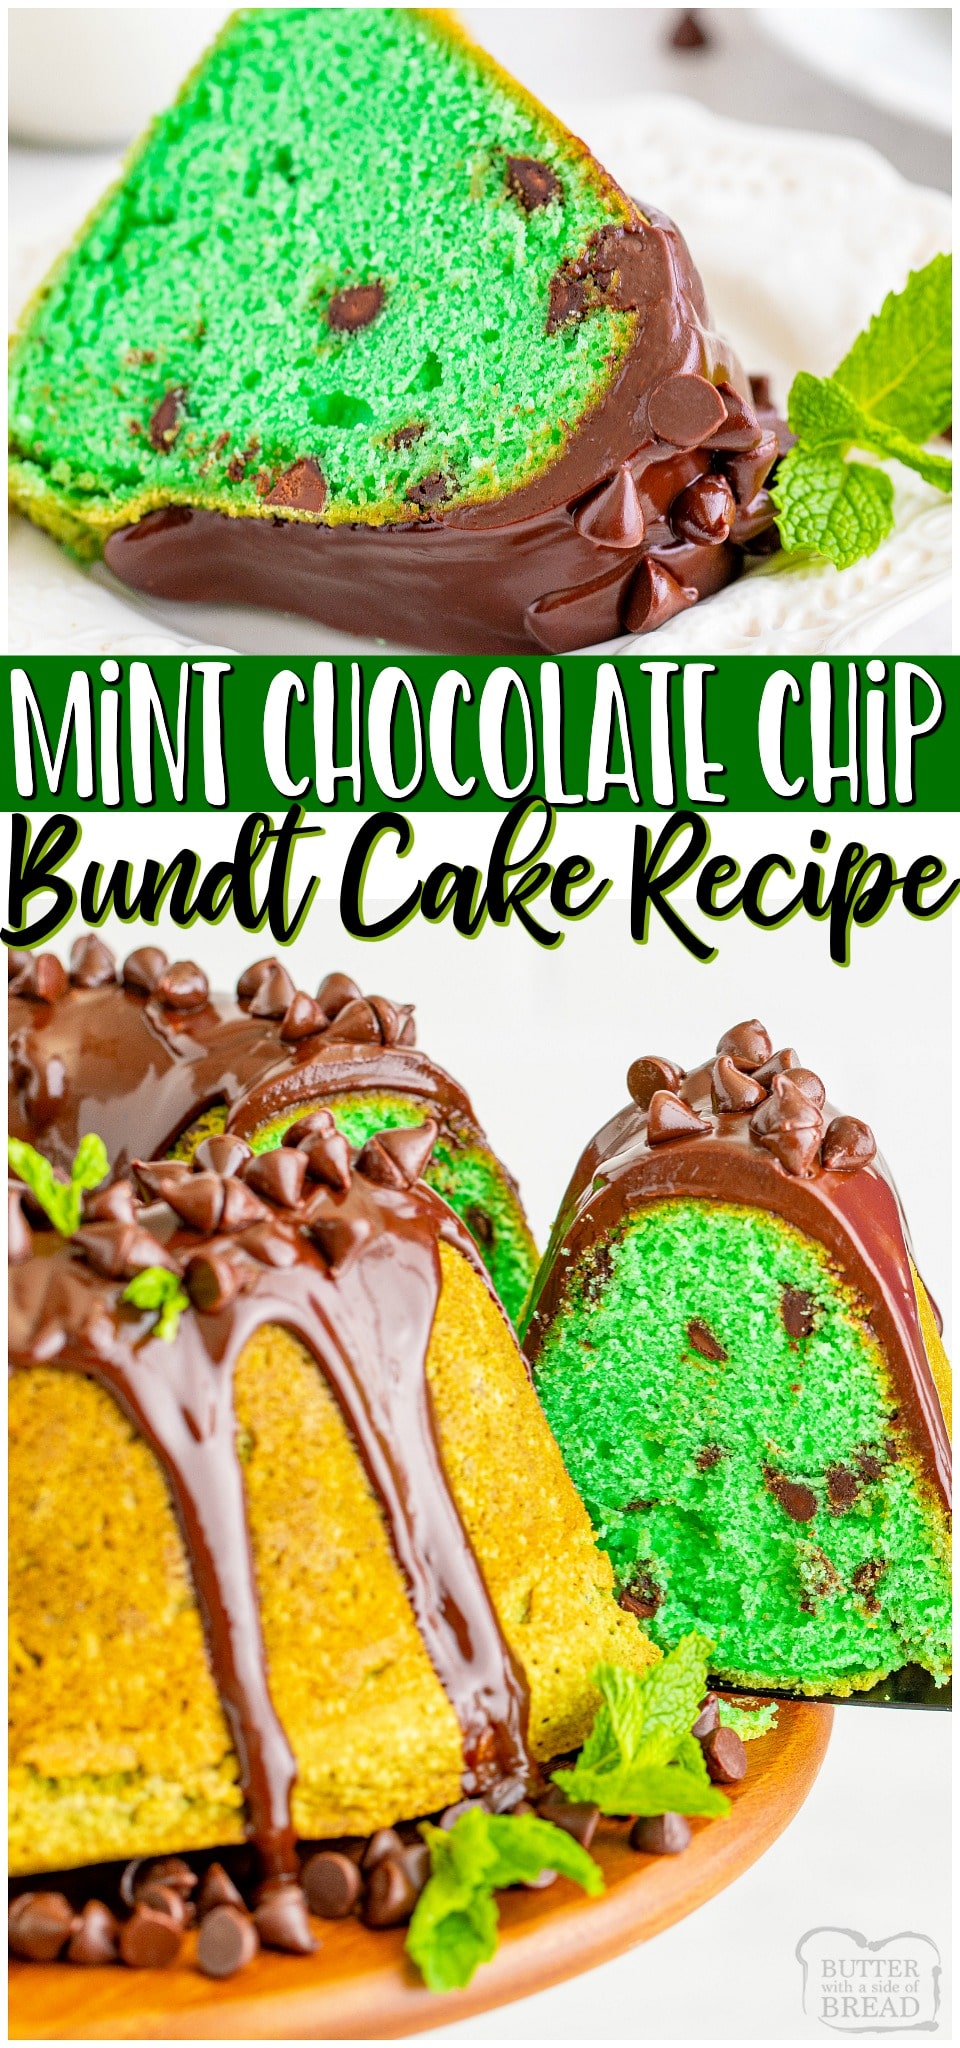 Mint chocolate chip bundt cake made for mint chip lovers! Minty green cake topped with sweet chocolate glaze & chocolate chips for a festive & fun holiday cake recipe. #mint #mintchip #chocolatechip #baking #cake #bundt #dessert #holidays #green #easyrecipe from BUTTER WITH A SIDE OF BREAD